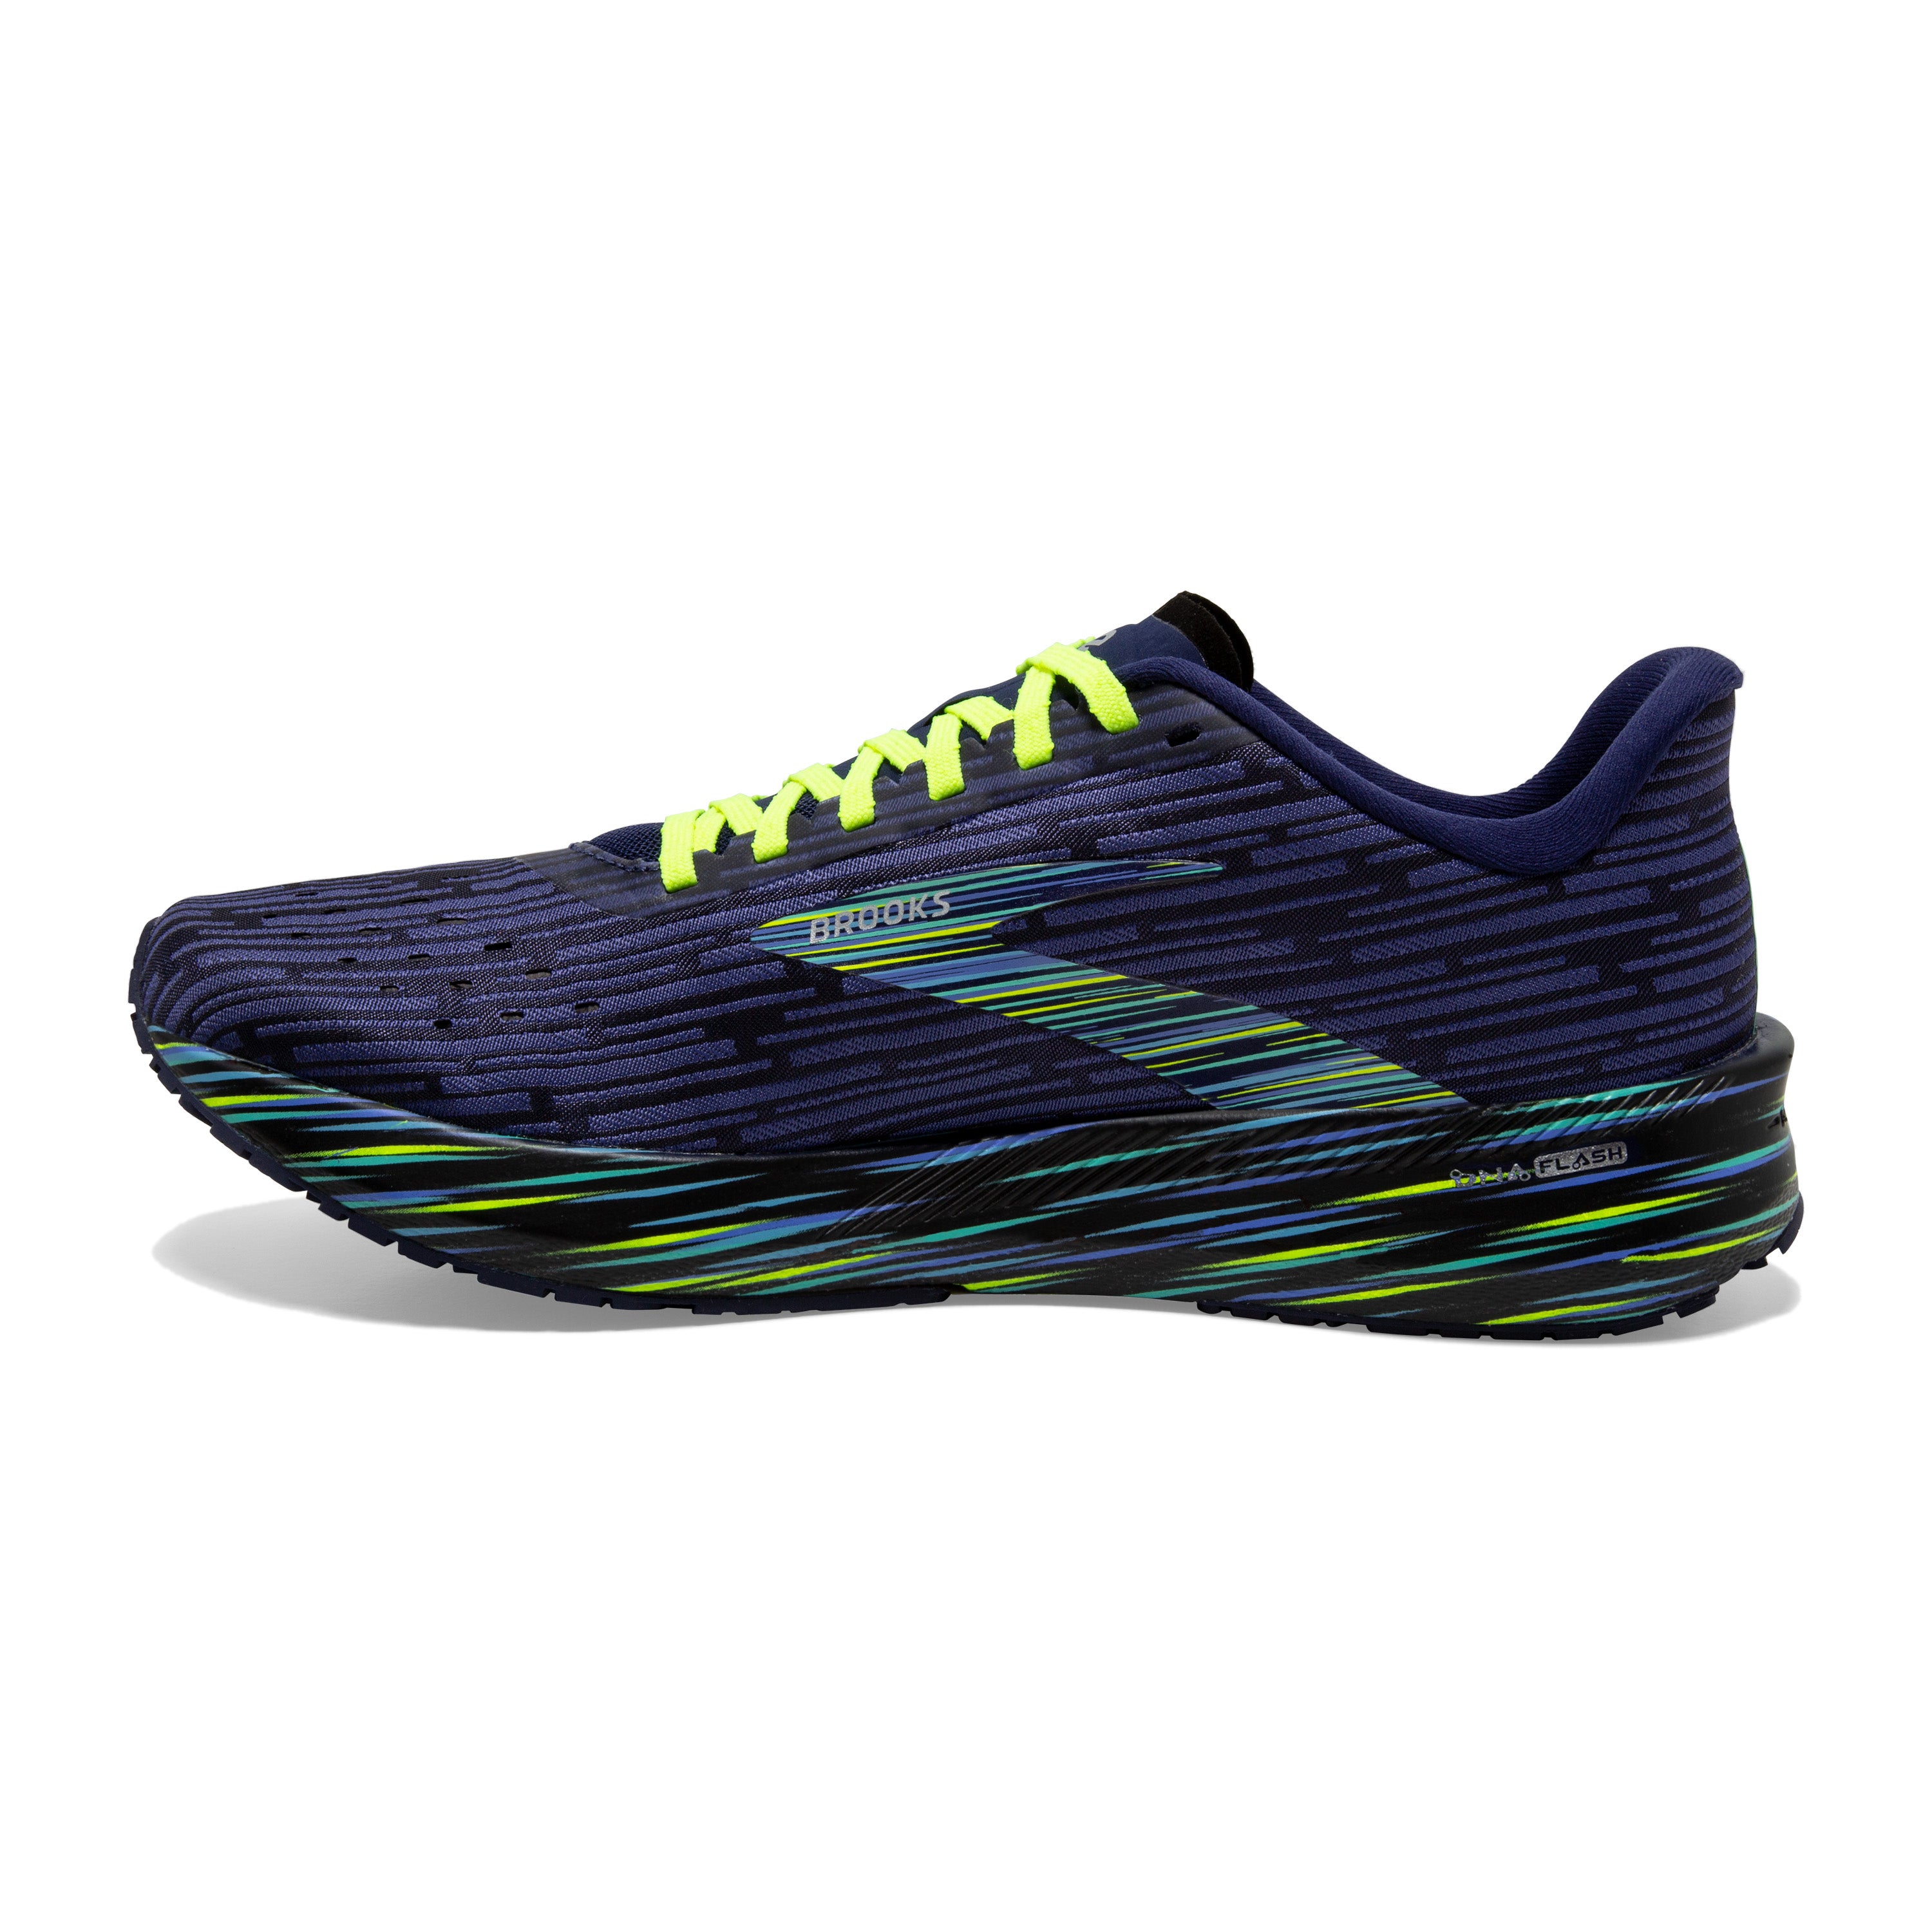 Hyperion Tempo (LE) Men's road-running shoes